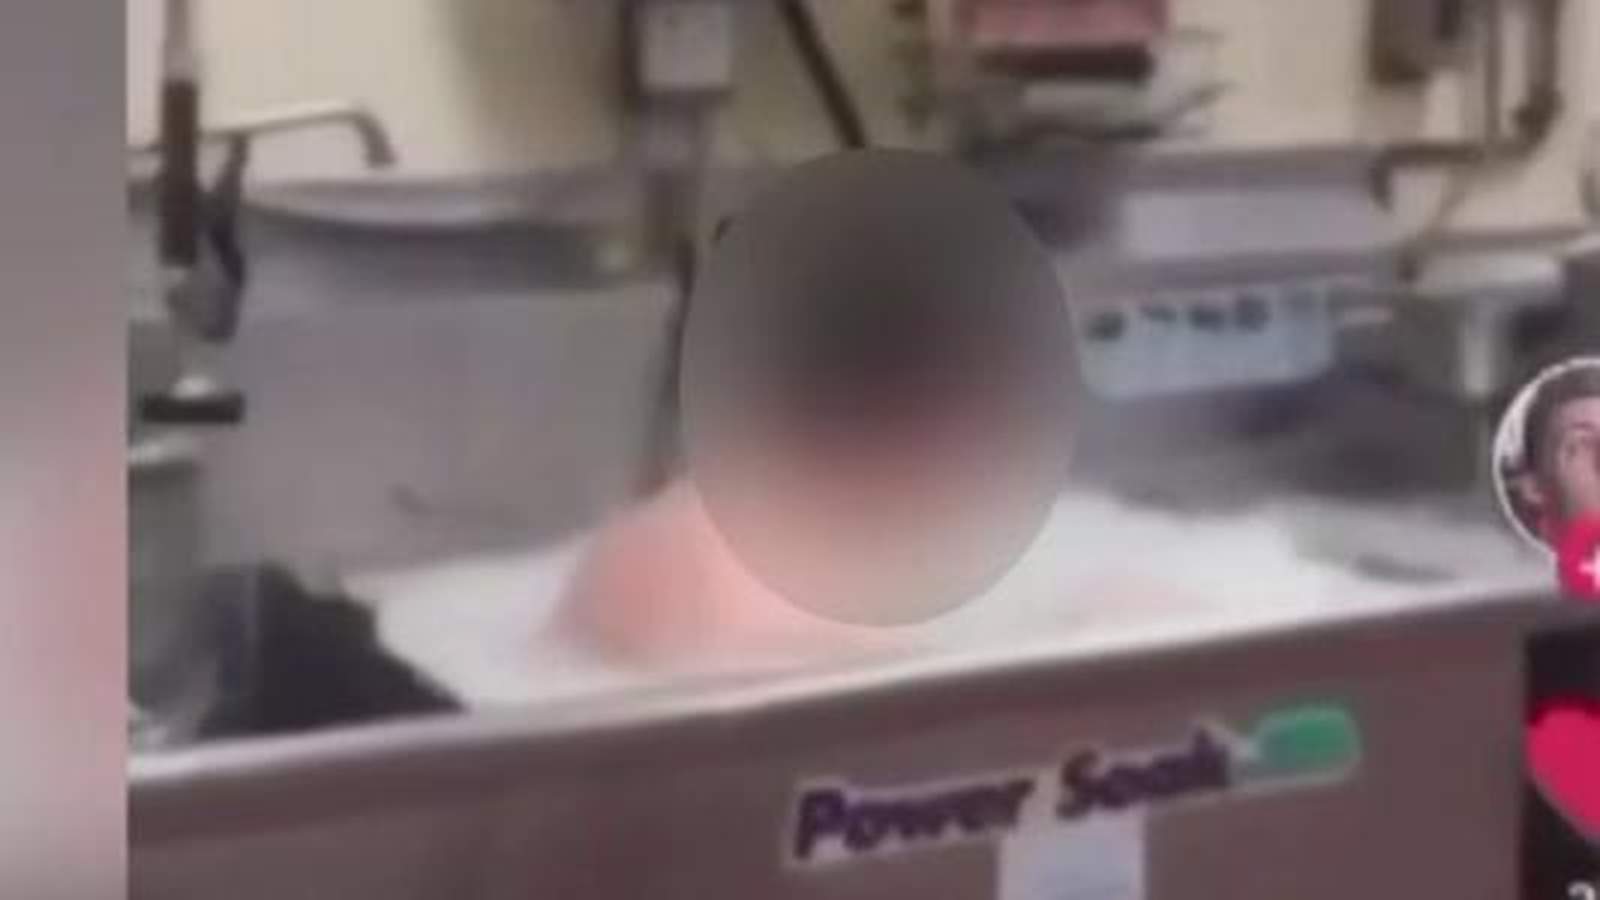 Workers fired from Michigan Wendy’s after video shows employee bathing in kitchen sink